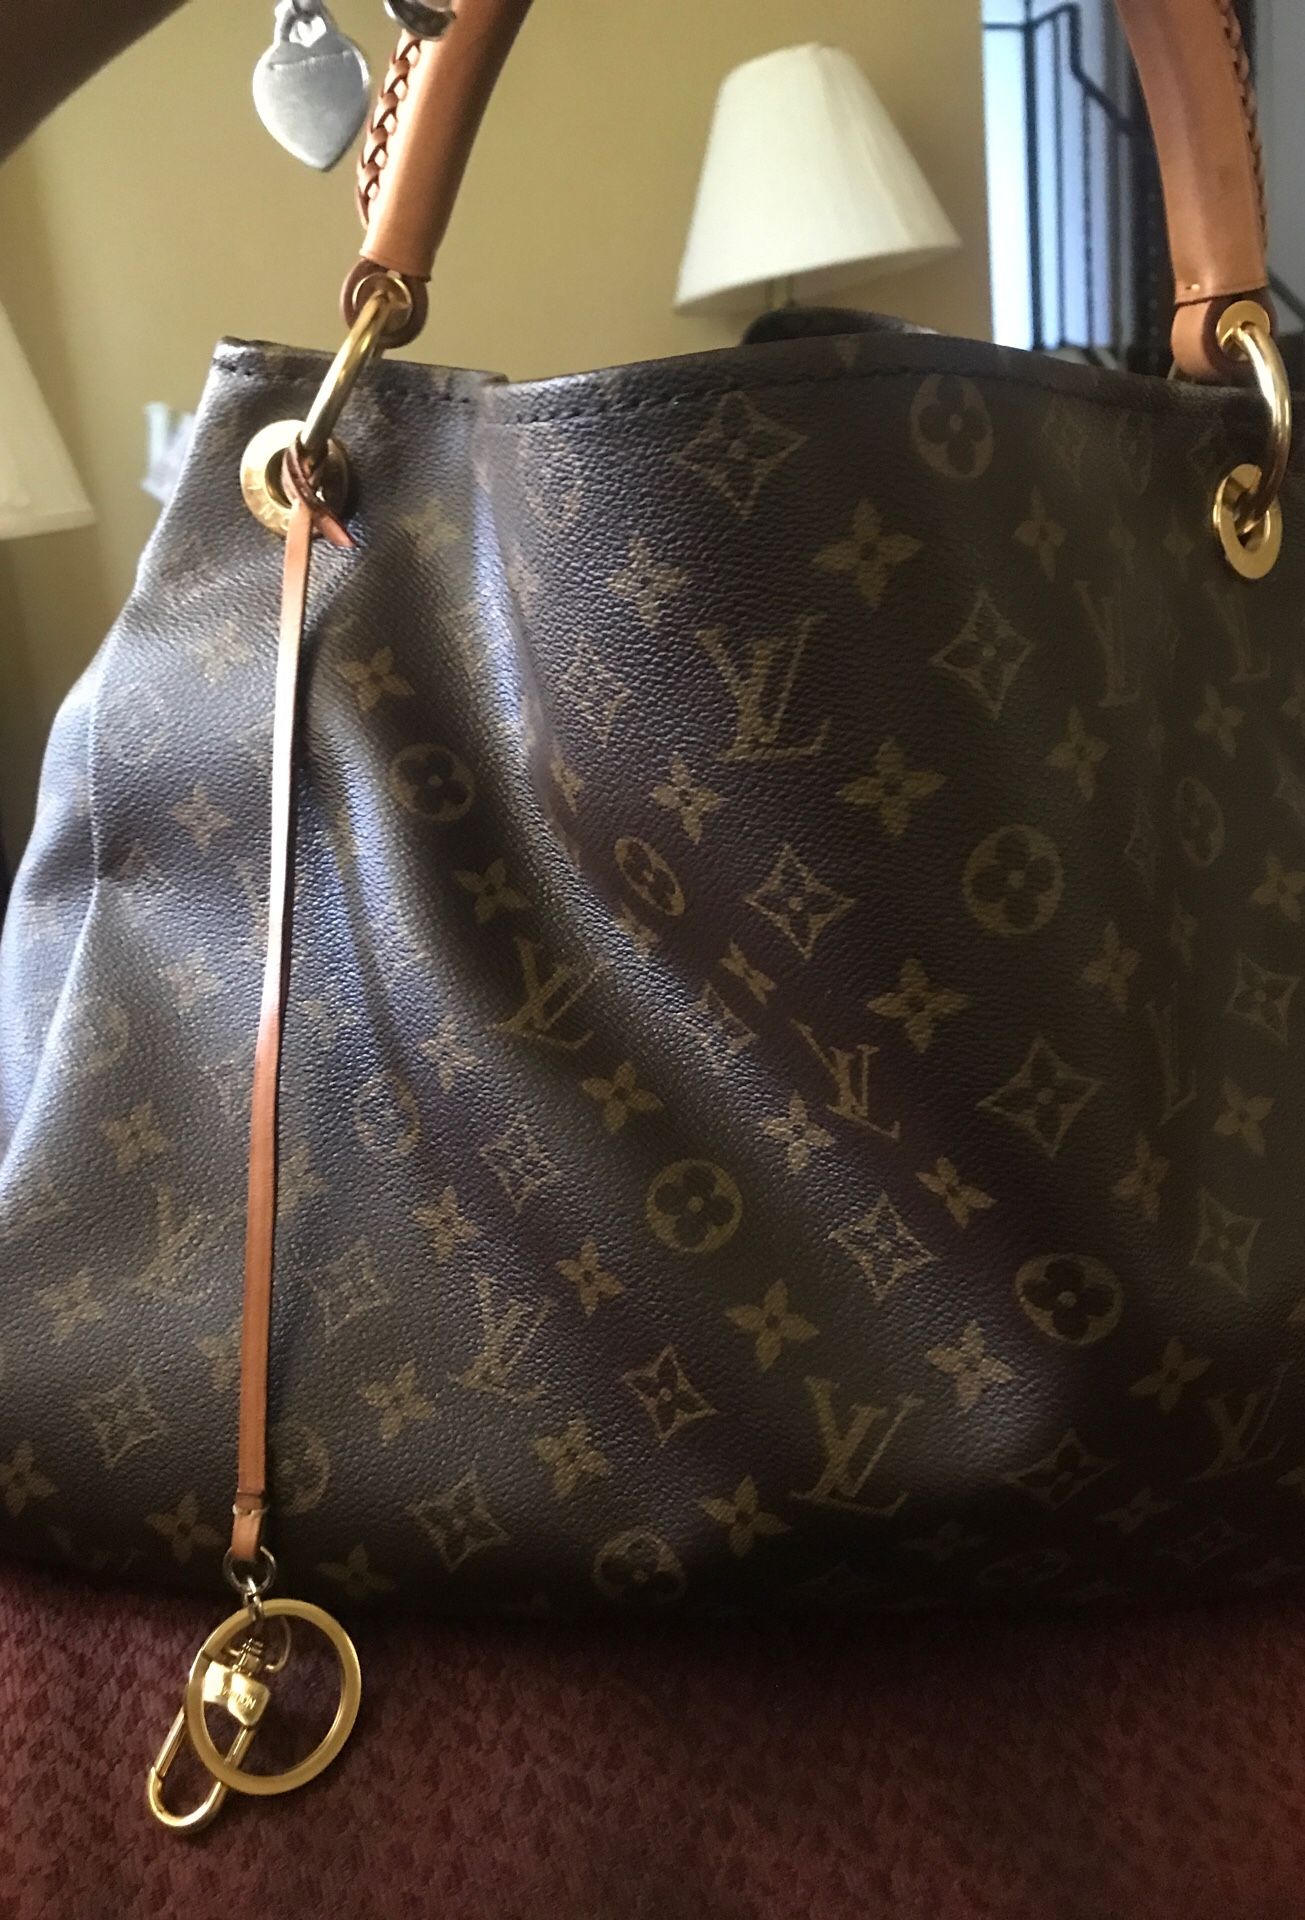 Authentic Louis Vuitton Artsy MM Bag. Bought at LV Store Ross Pa. 9/2017